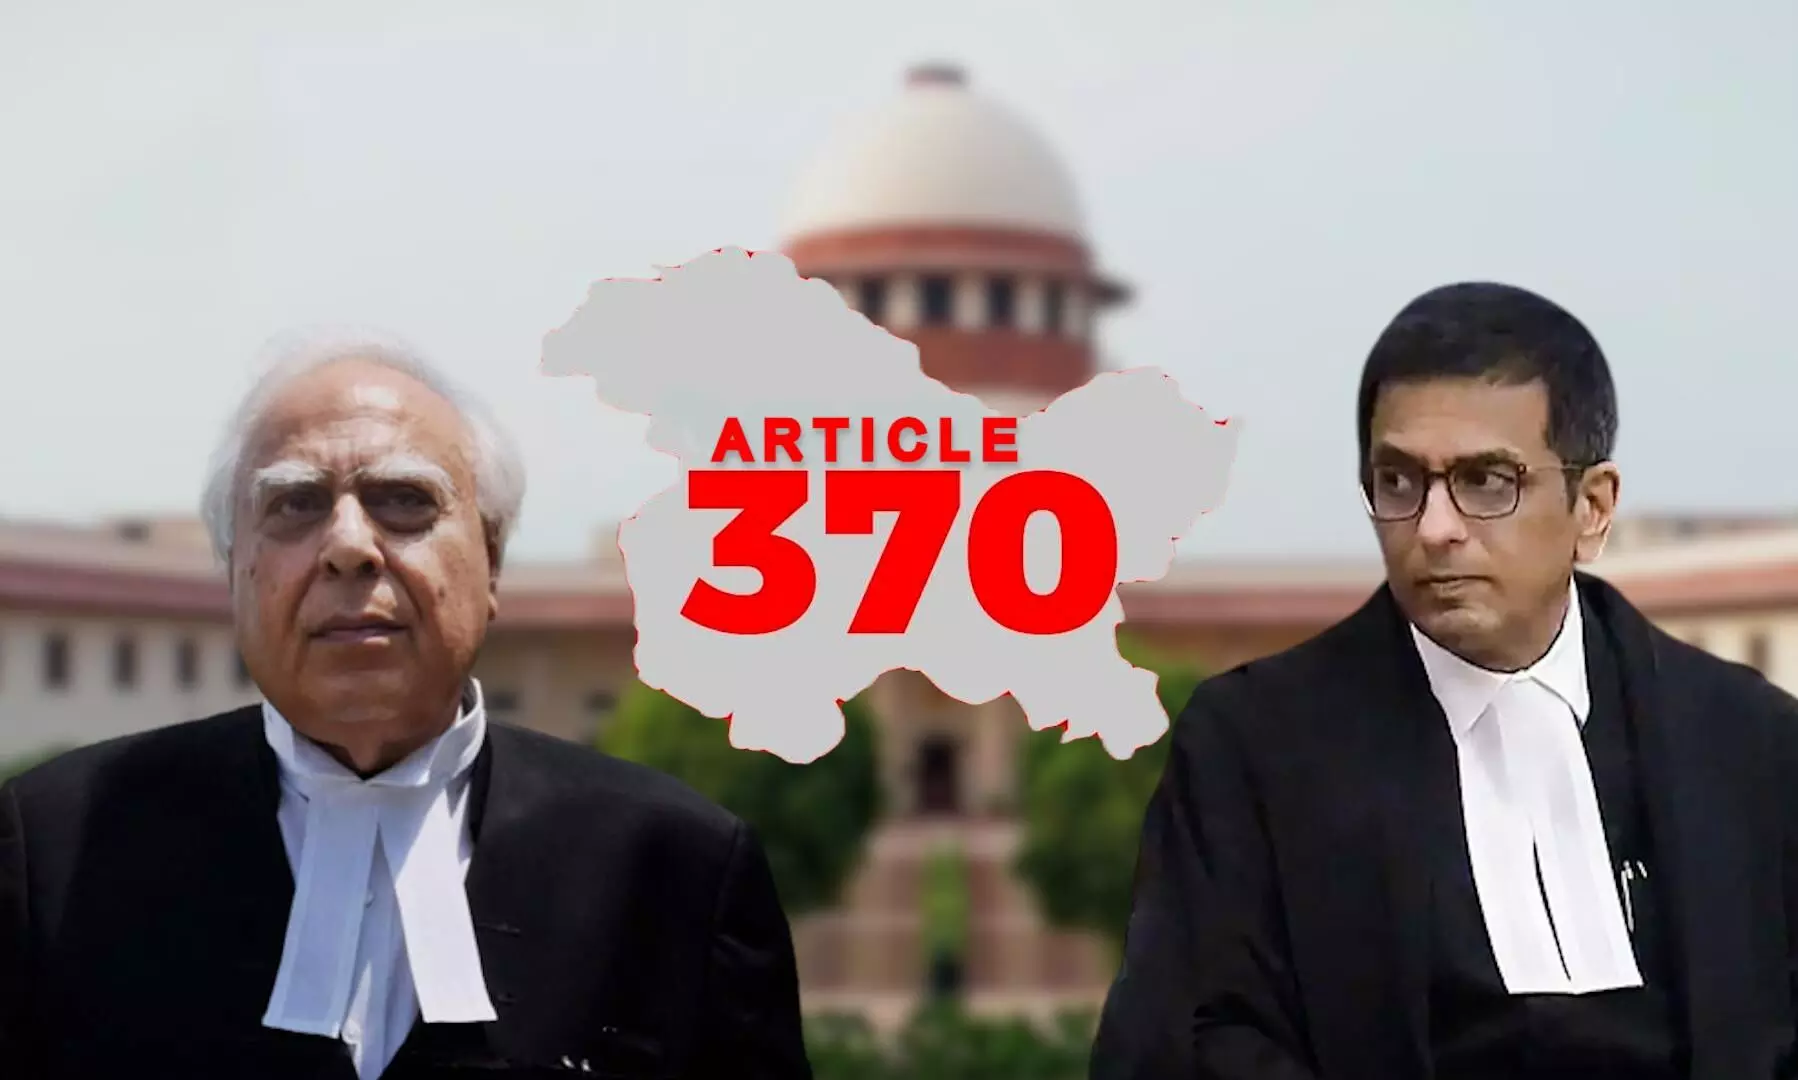 SC questions Article 370’s immunity from amendments, Sibal says no provision in Constitution